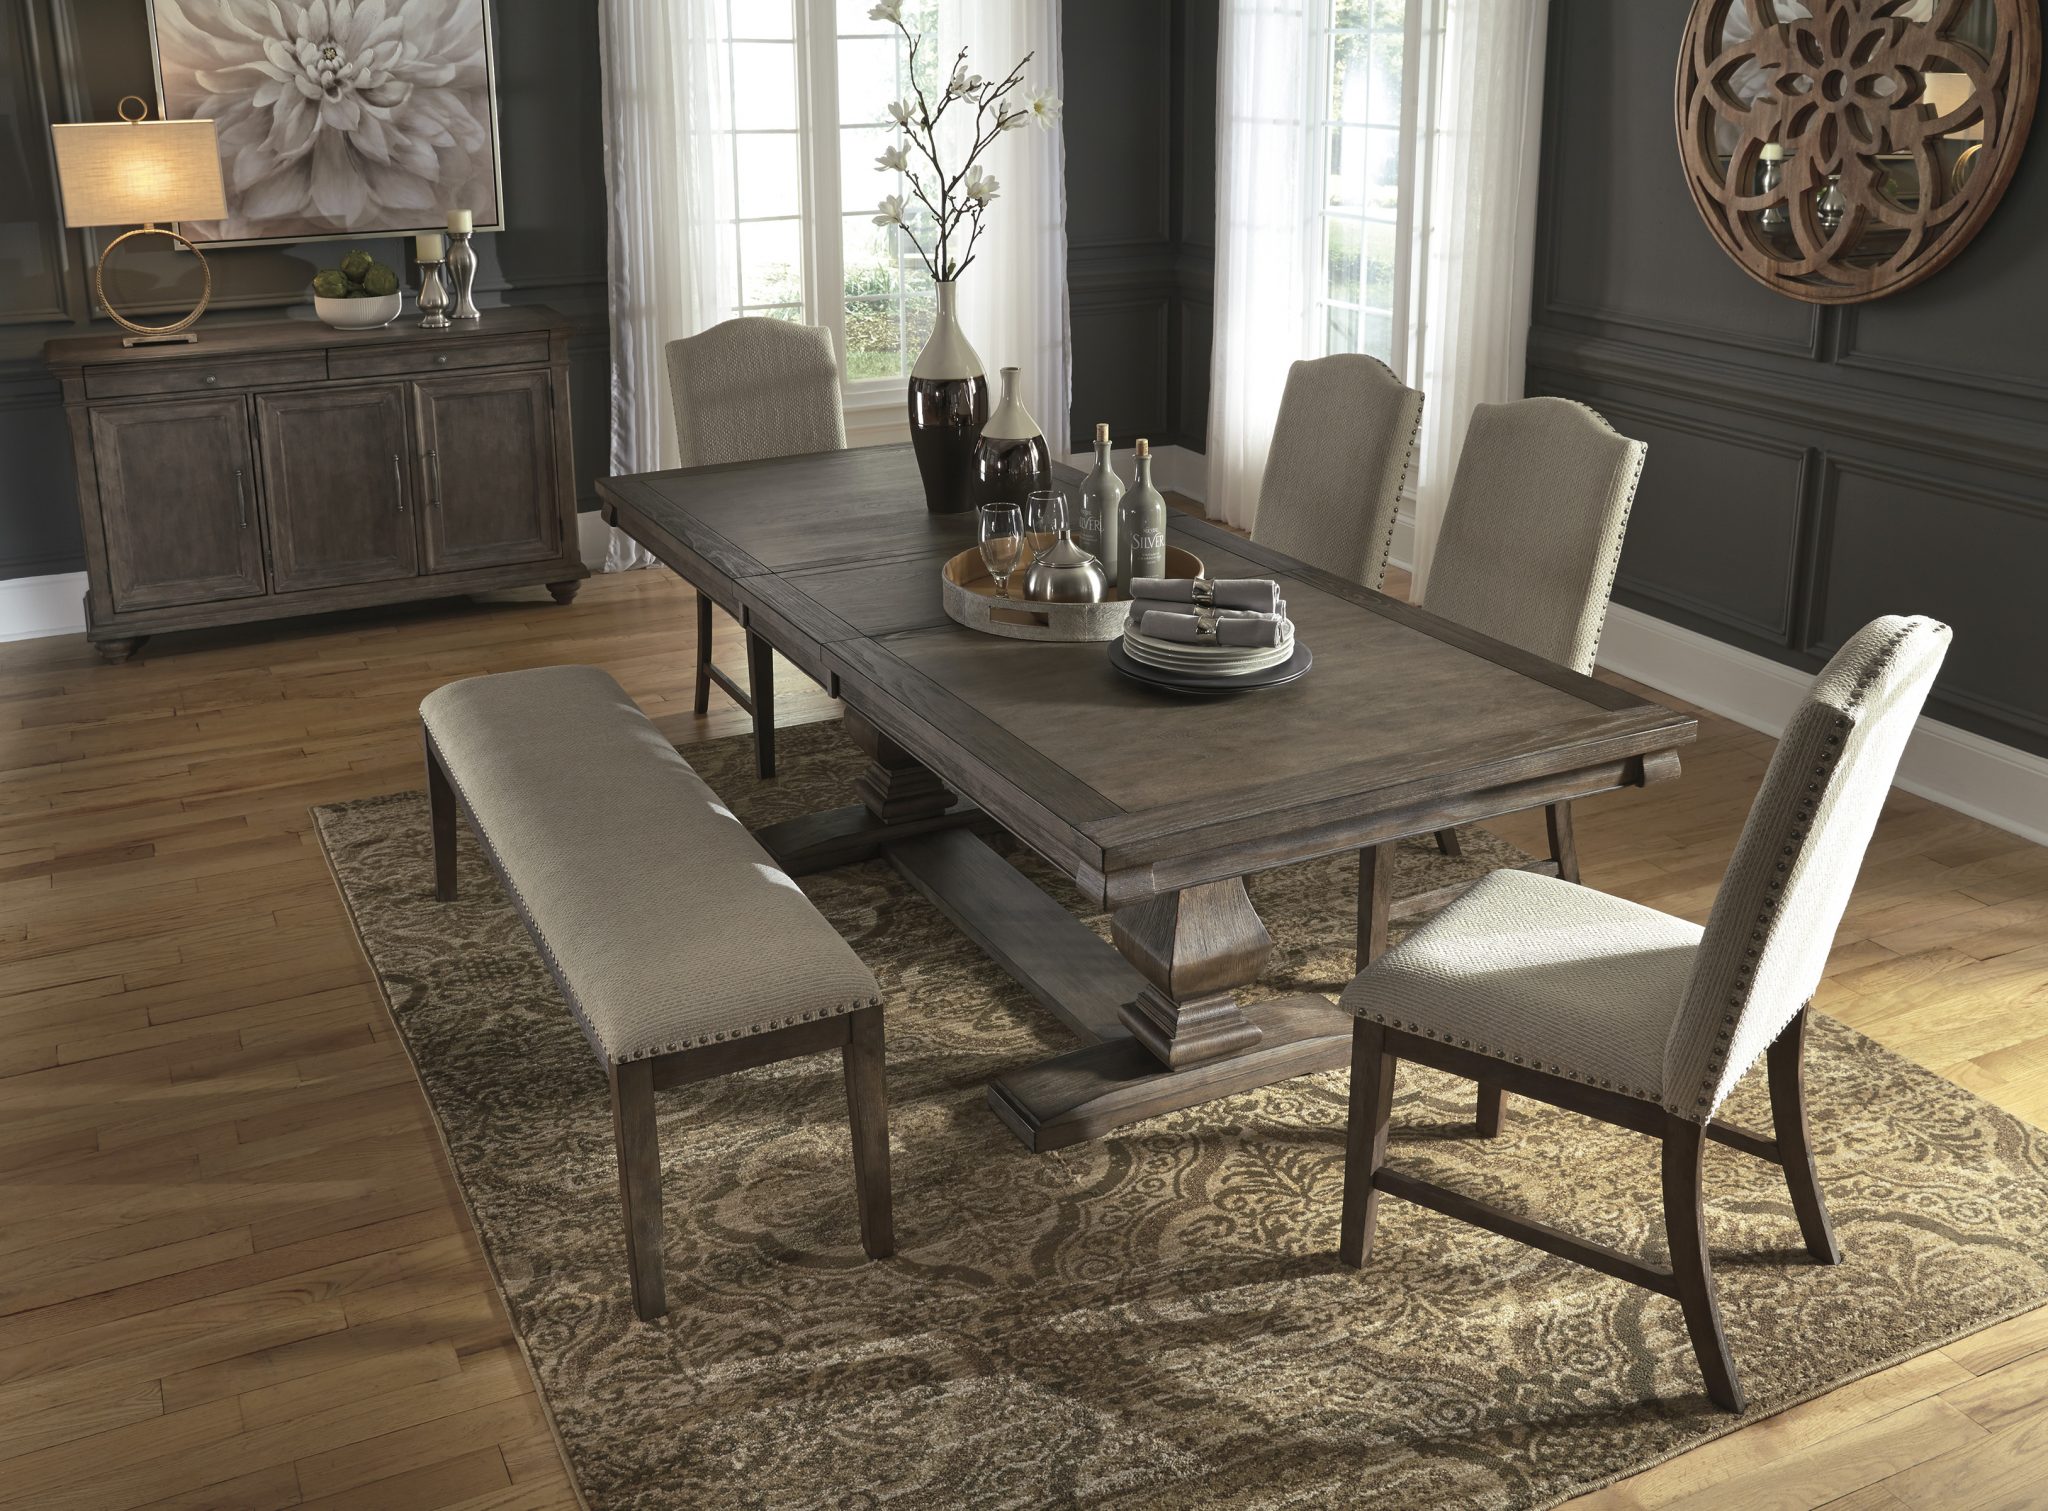 johnelle dining room set Johnelle dining table and 6 chairs